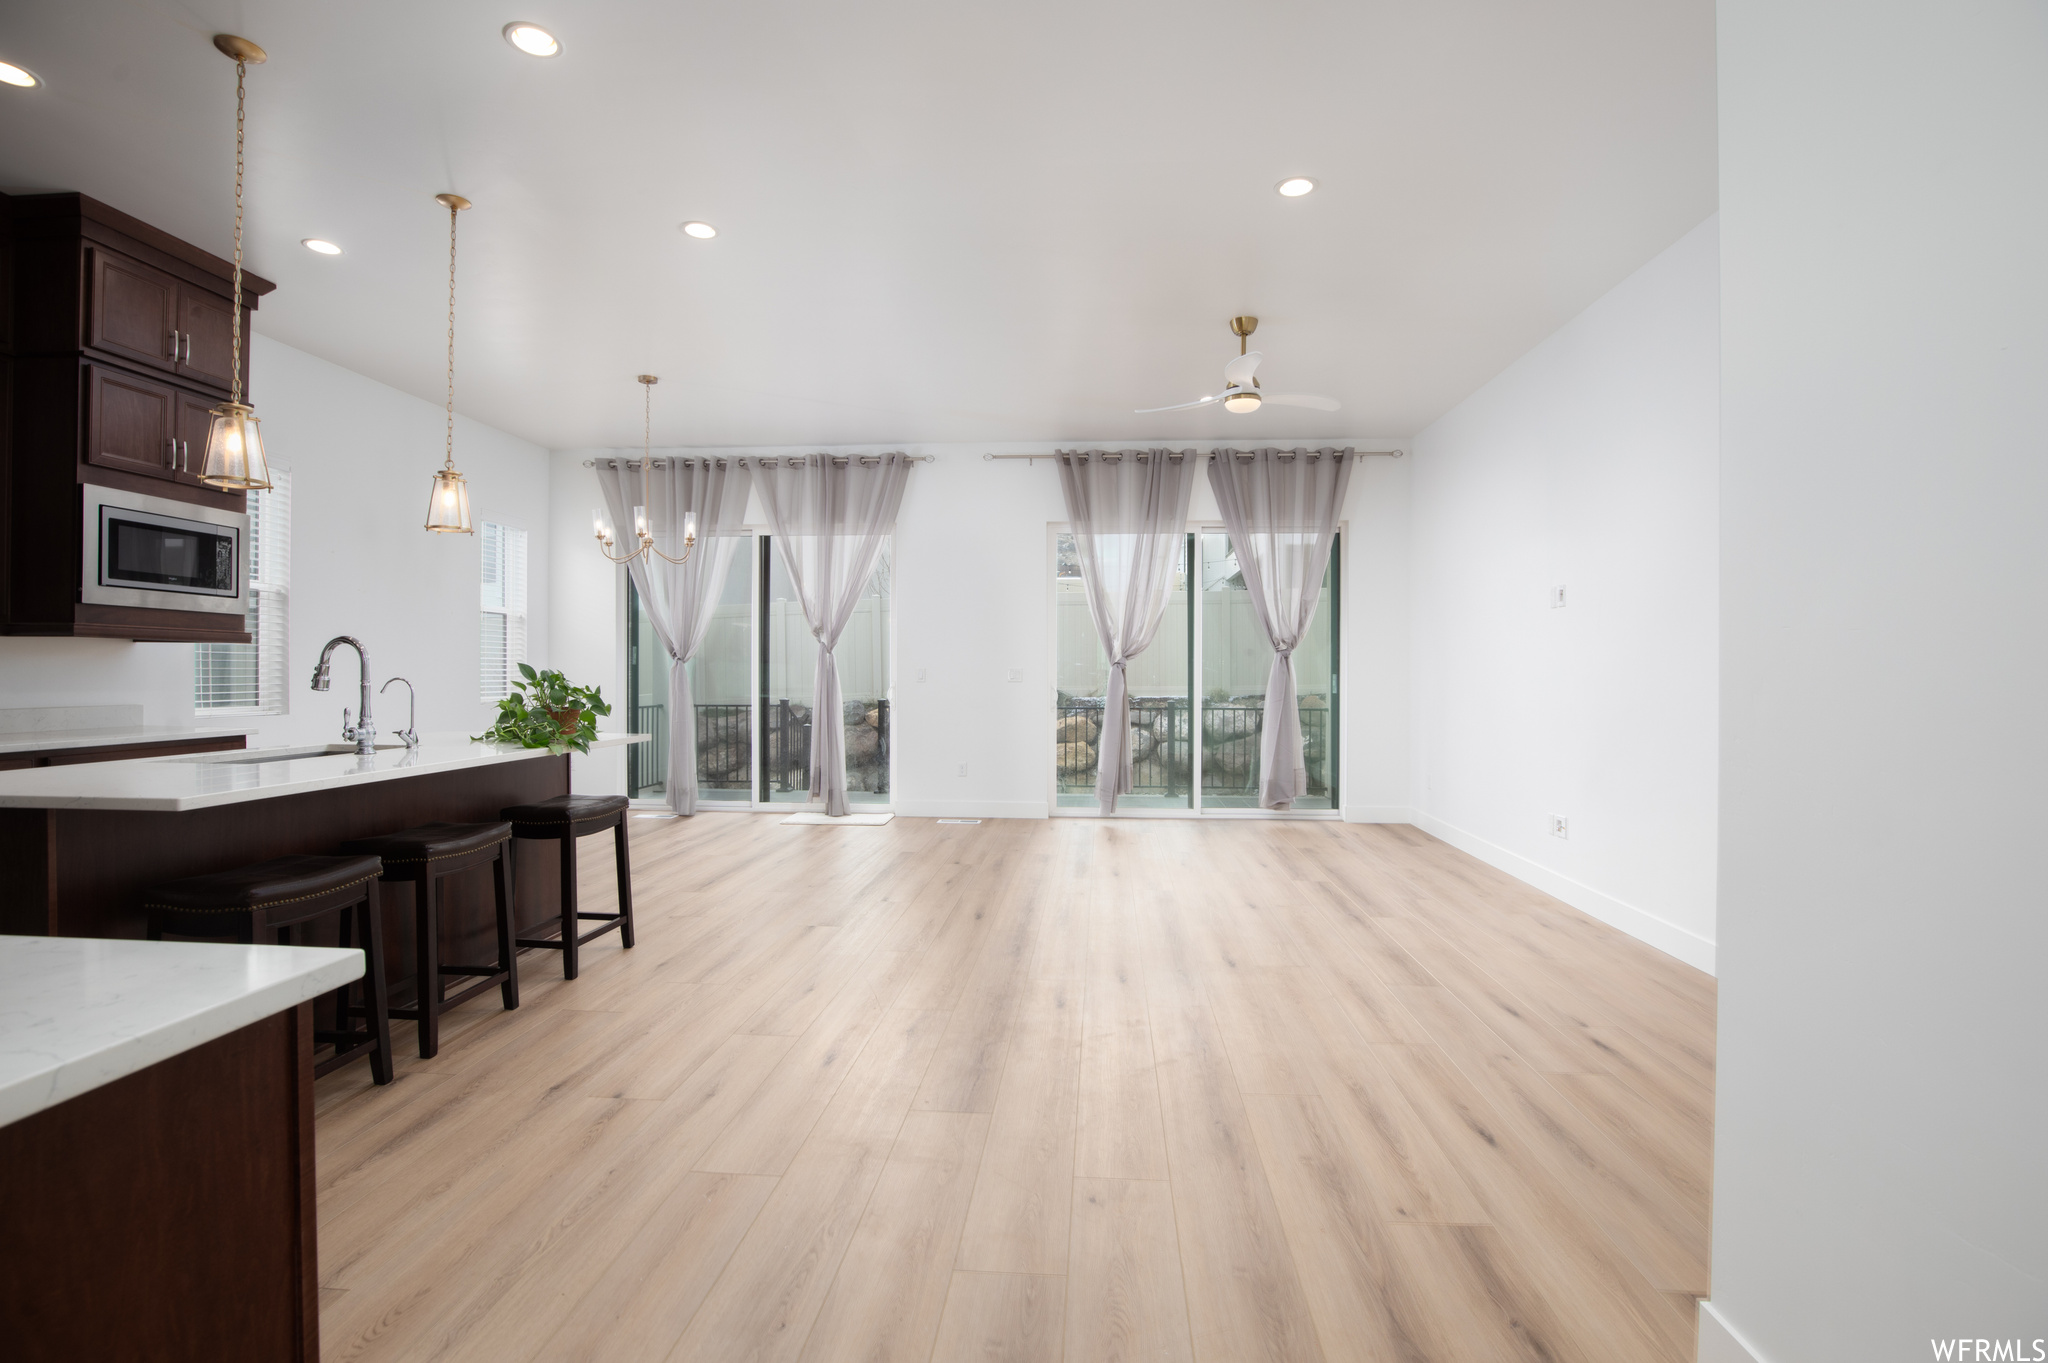 Interior space with light hardwood / wood-style flooring, ceiling fan, and sink